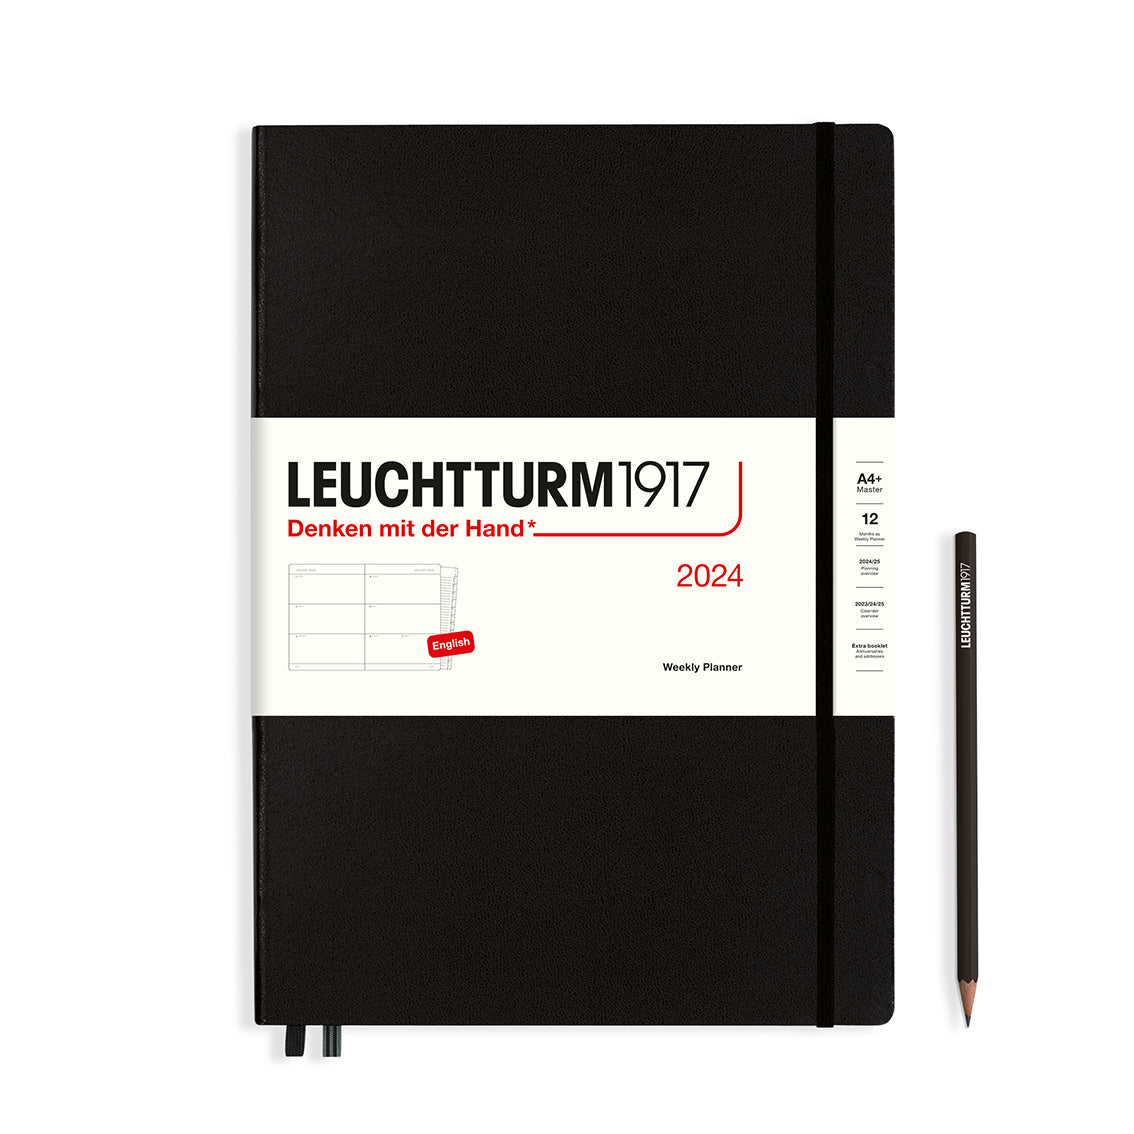 An image of a black planner with a black elastic band holding it together and a cream paper wrap around the middle stating the business name Leuchtturm1917, that it is for the year 2024, it is a weekly planner, is A4+ in size and an English language version. It has an image on the wrap showing the inside layout which is a week spread across 2 pages. A black pencil is shown at the side of the planner.